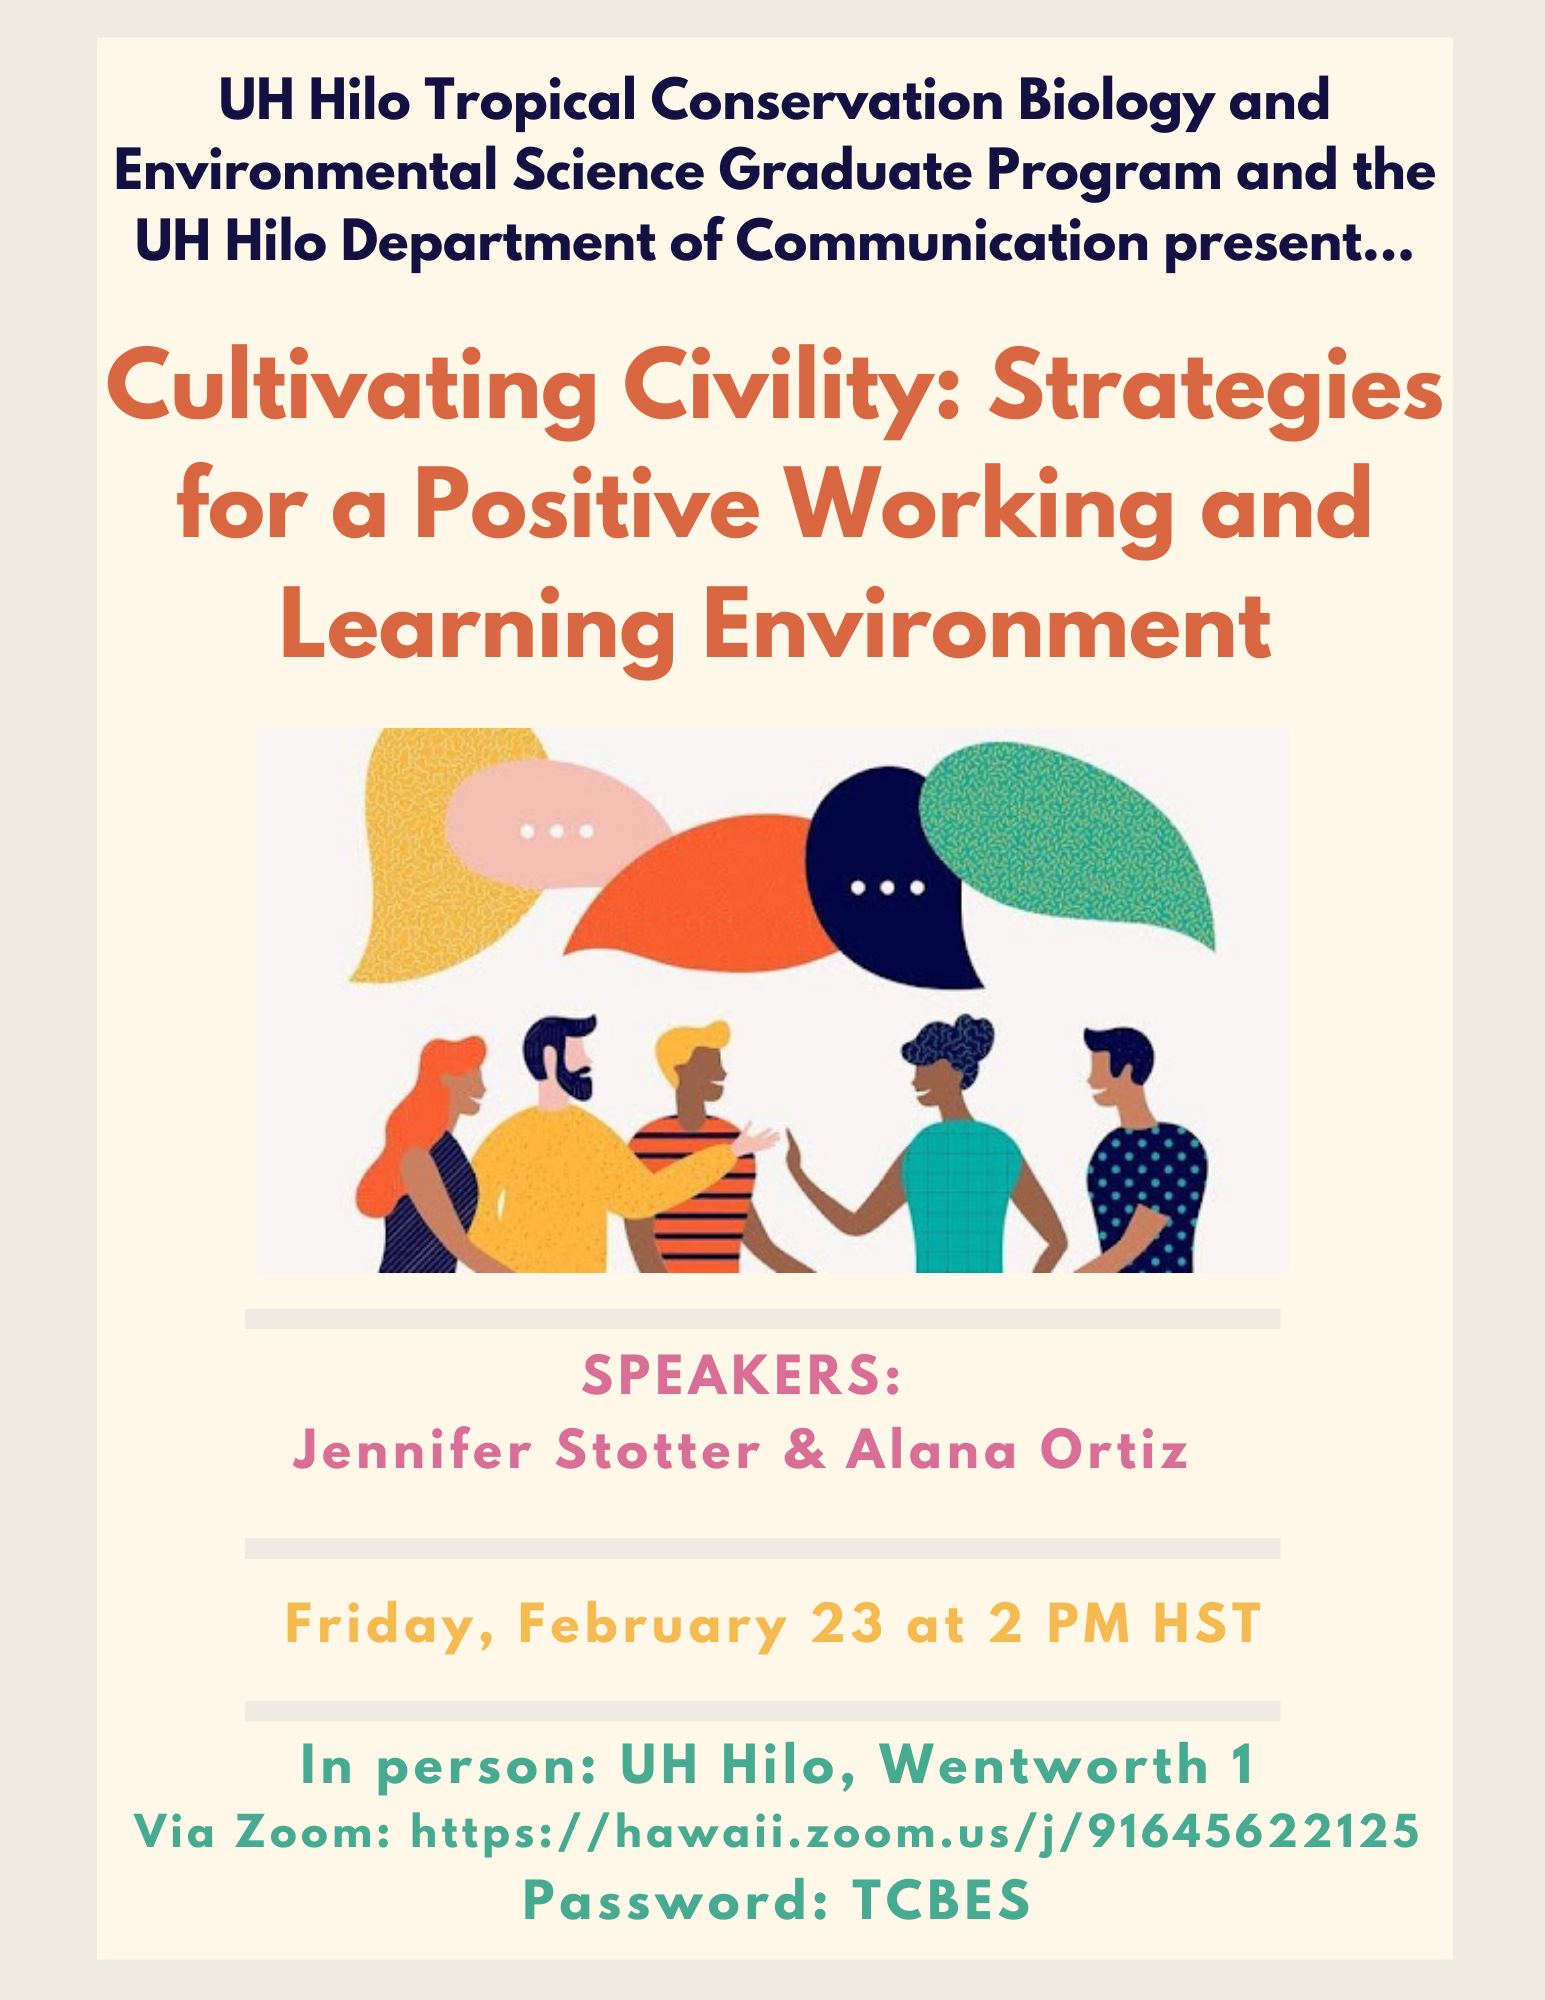 **Seminar Title:** Cultivating Civility: Strategies for a Positive Working and Learning Environment  
**Speaker:**  Jennifer Stotter and Alana Ortiz  
**When:** Friday, February 23, 2:00 pm HST  
**Where:**  In-person at UH Hilo, Wentworth Building, Room 1 and online via Zoom [https://hawaii.zoom.us/j/91645622125](https://hawaii.zoom.us/j/91645622125)  
Meeting ID: 916 4562 2125  
Passcode: TCBES